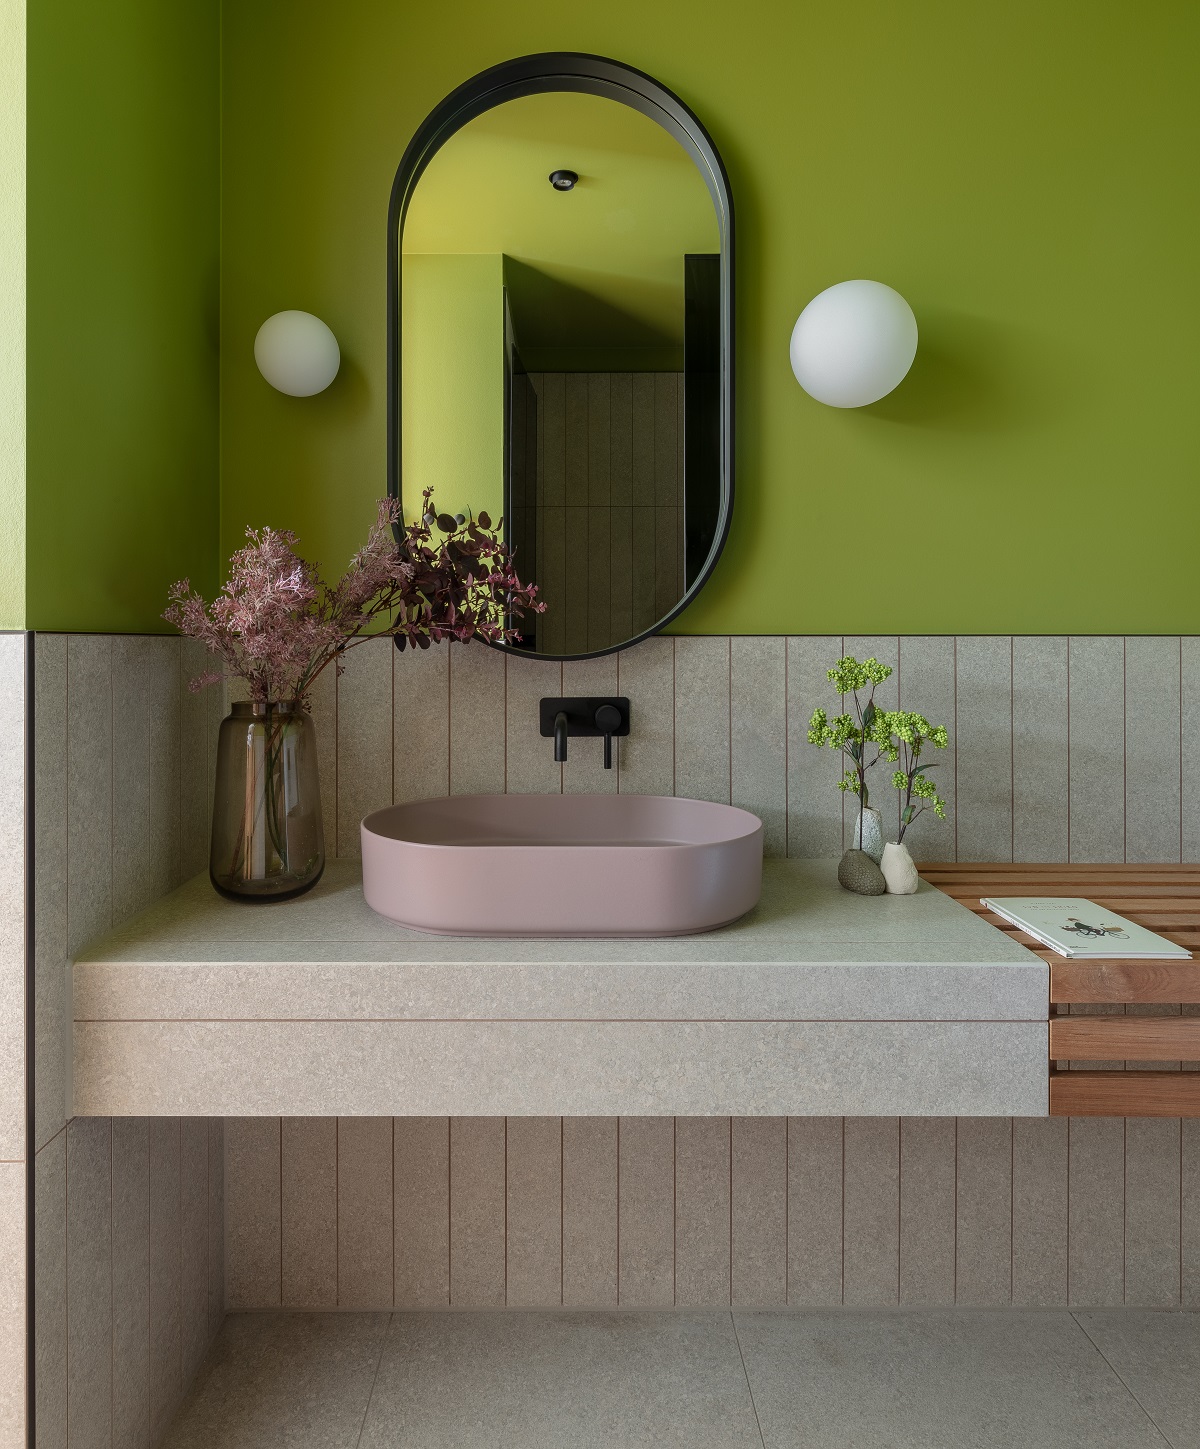 bathroom vanity space with cream tiles and a green wall with dusty pink basin